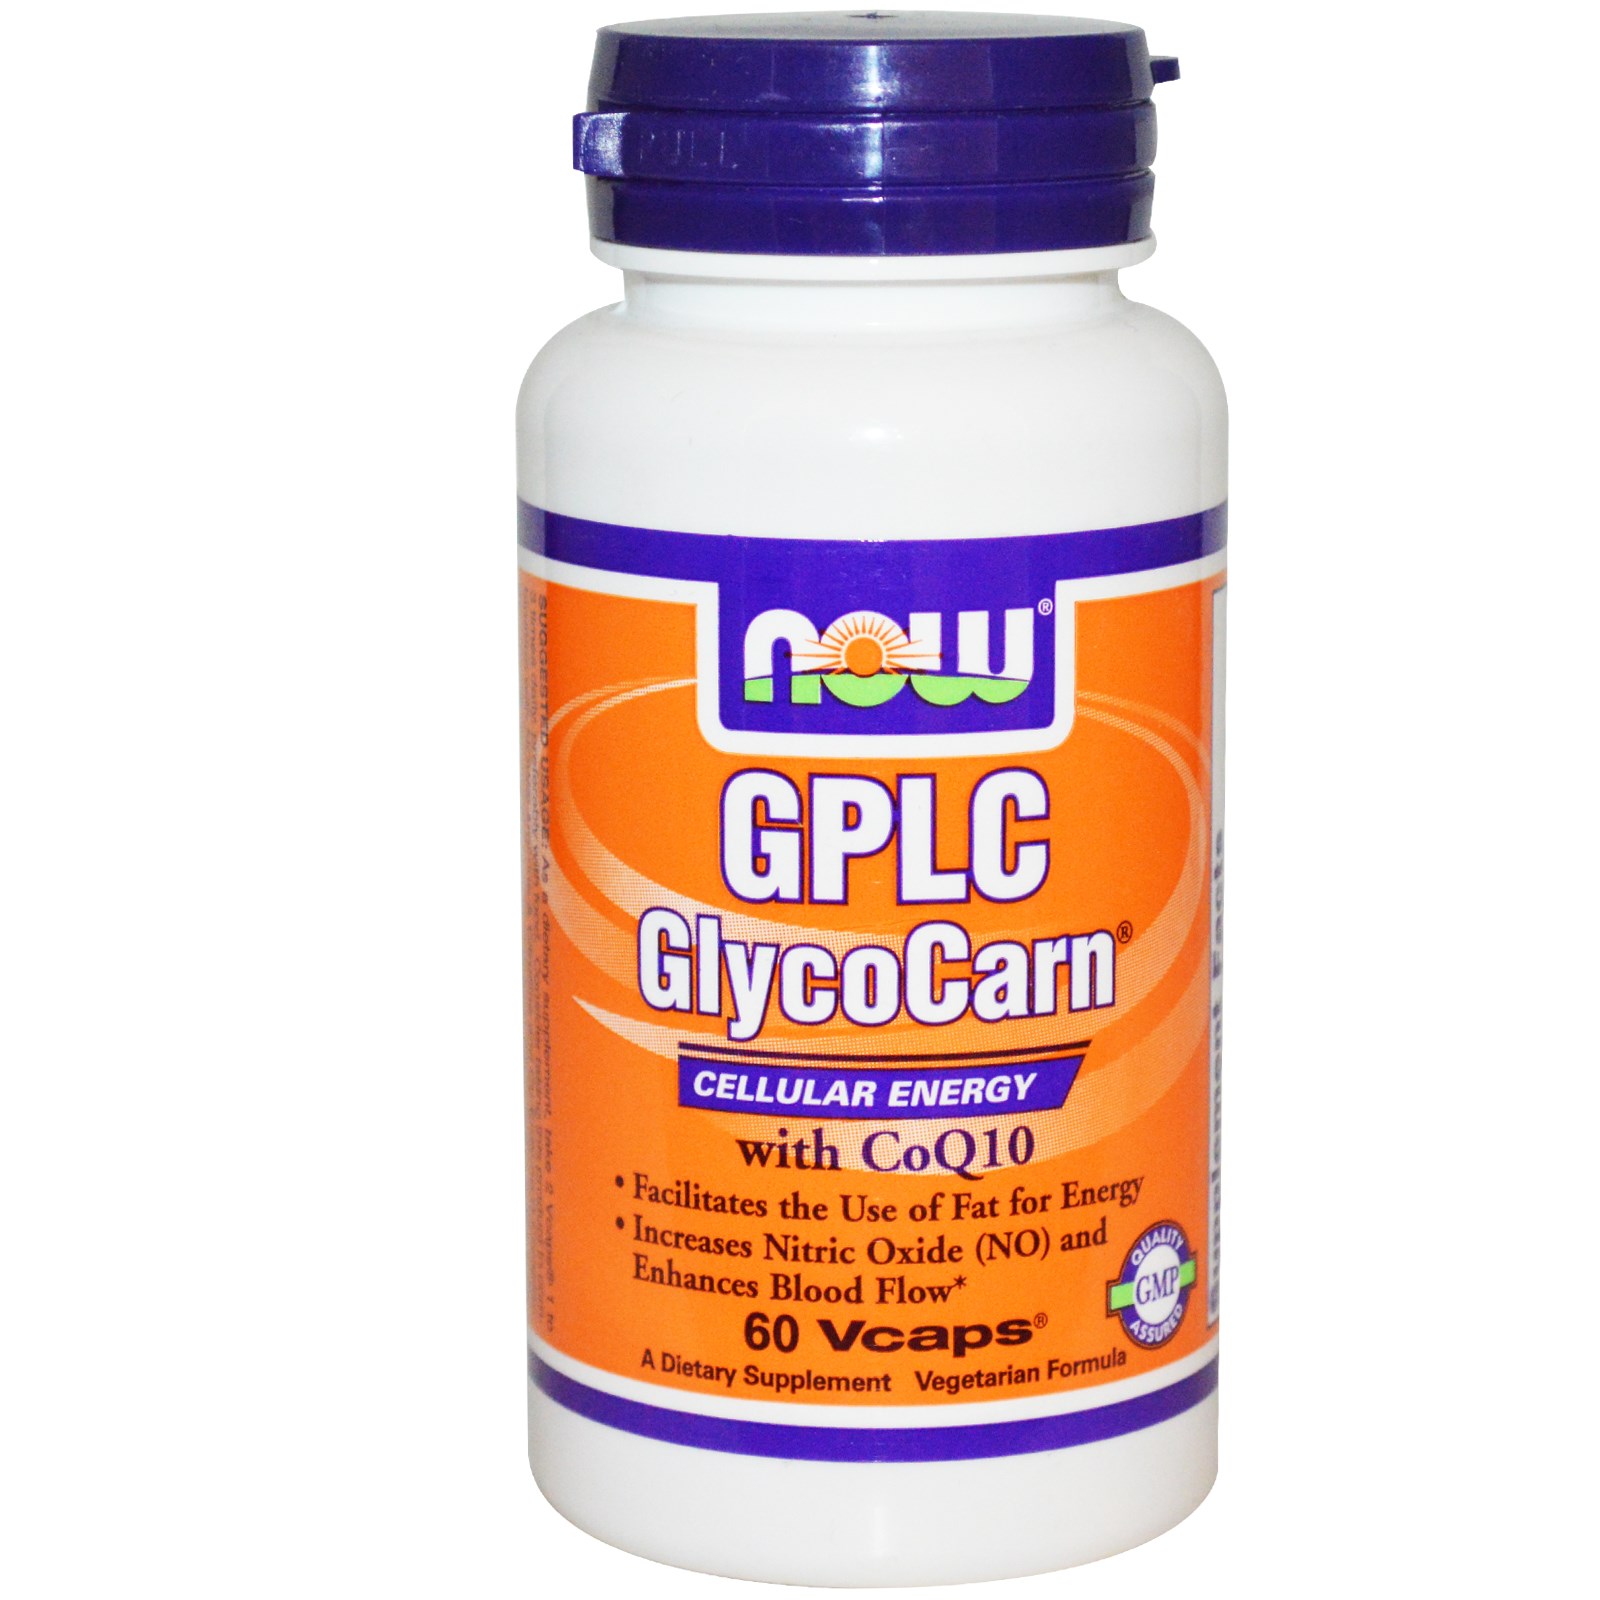 GPLC GlycoCarn with CoQ10 - 60 Vcaps